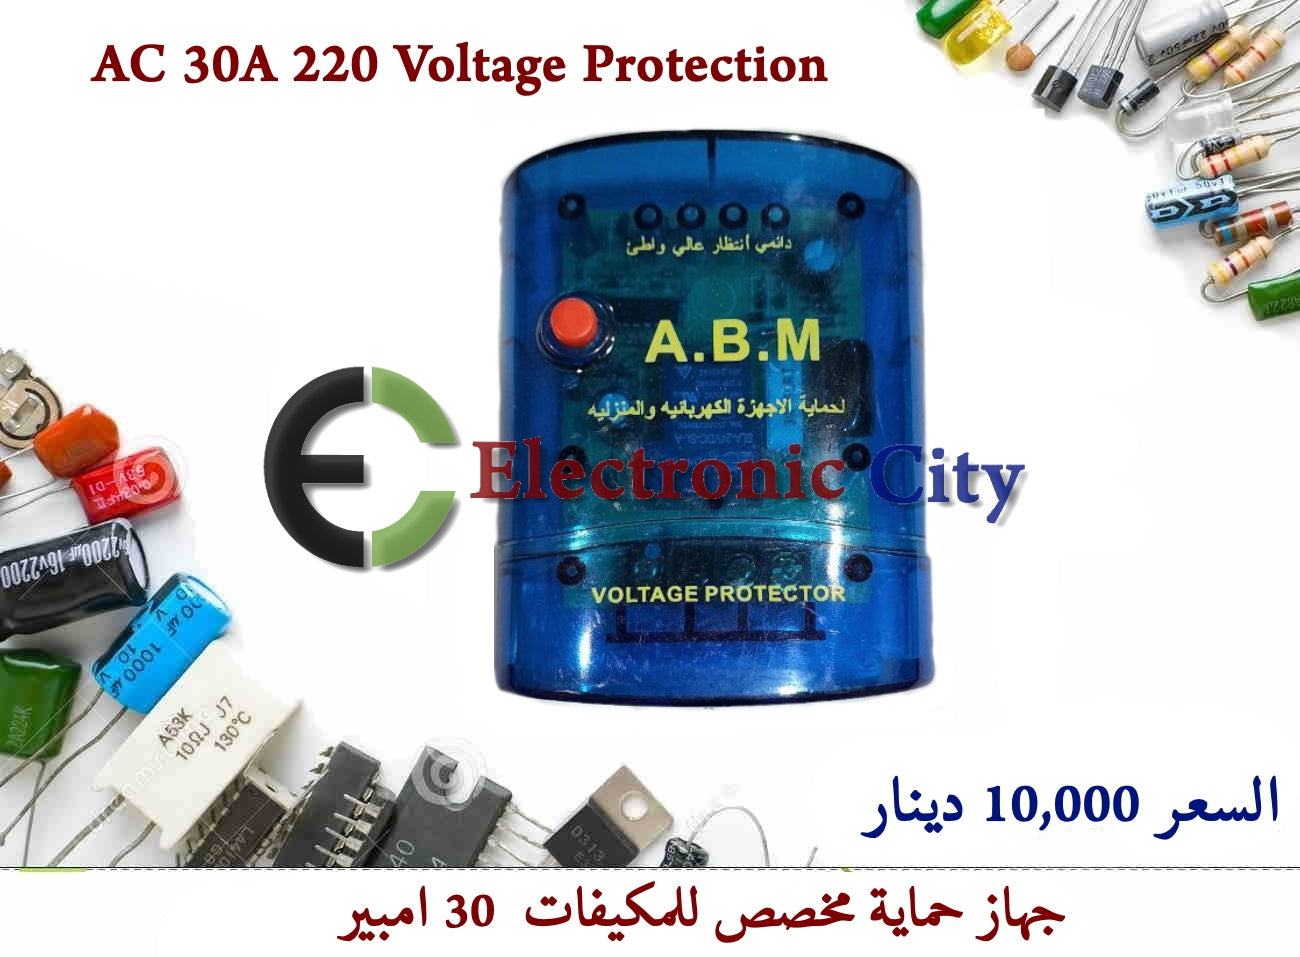 AC 30A 220 Voltage Protection